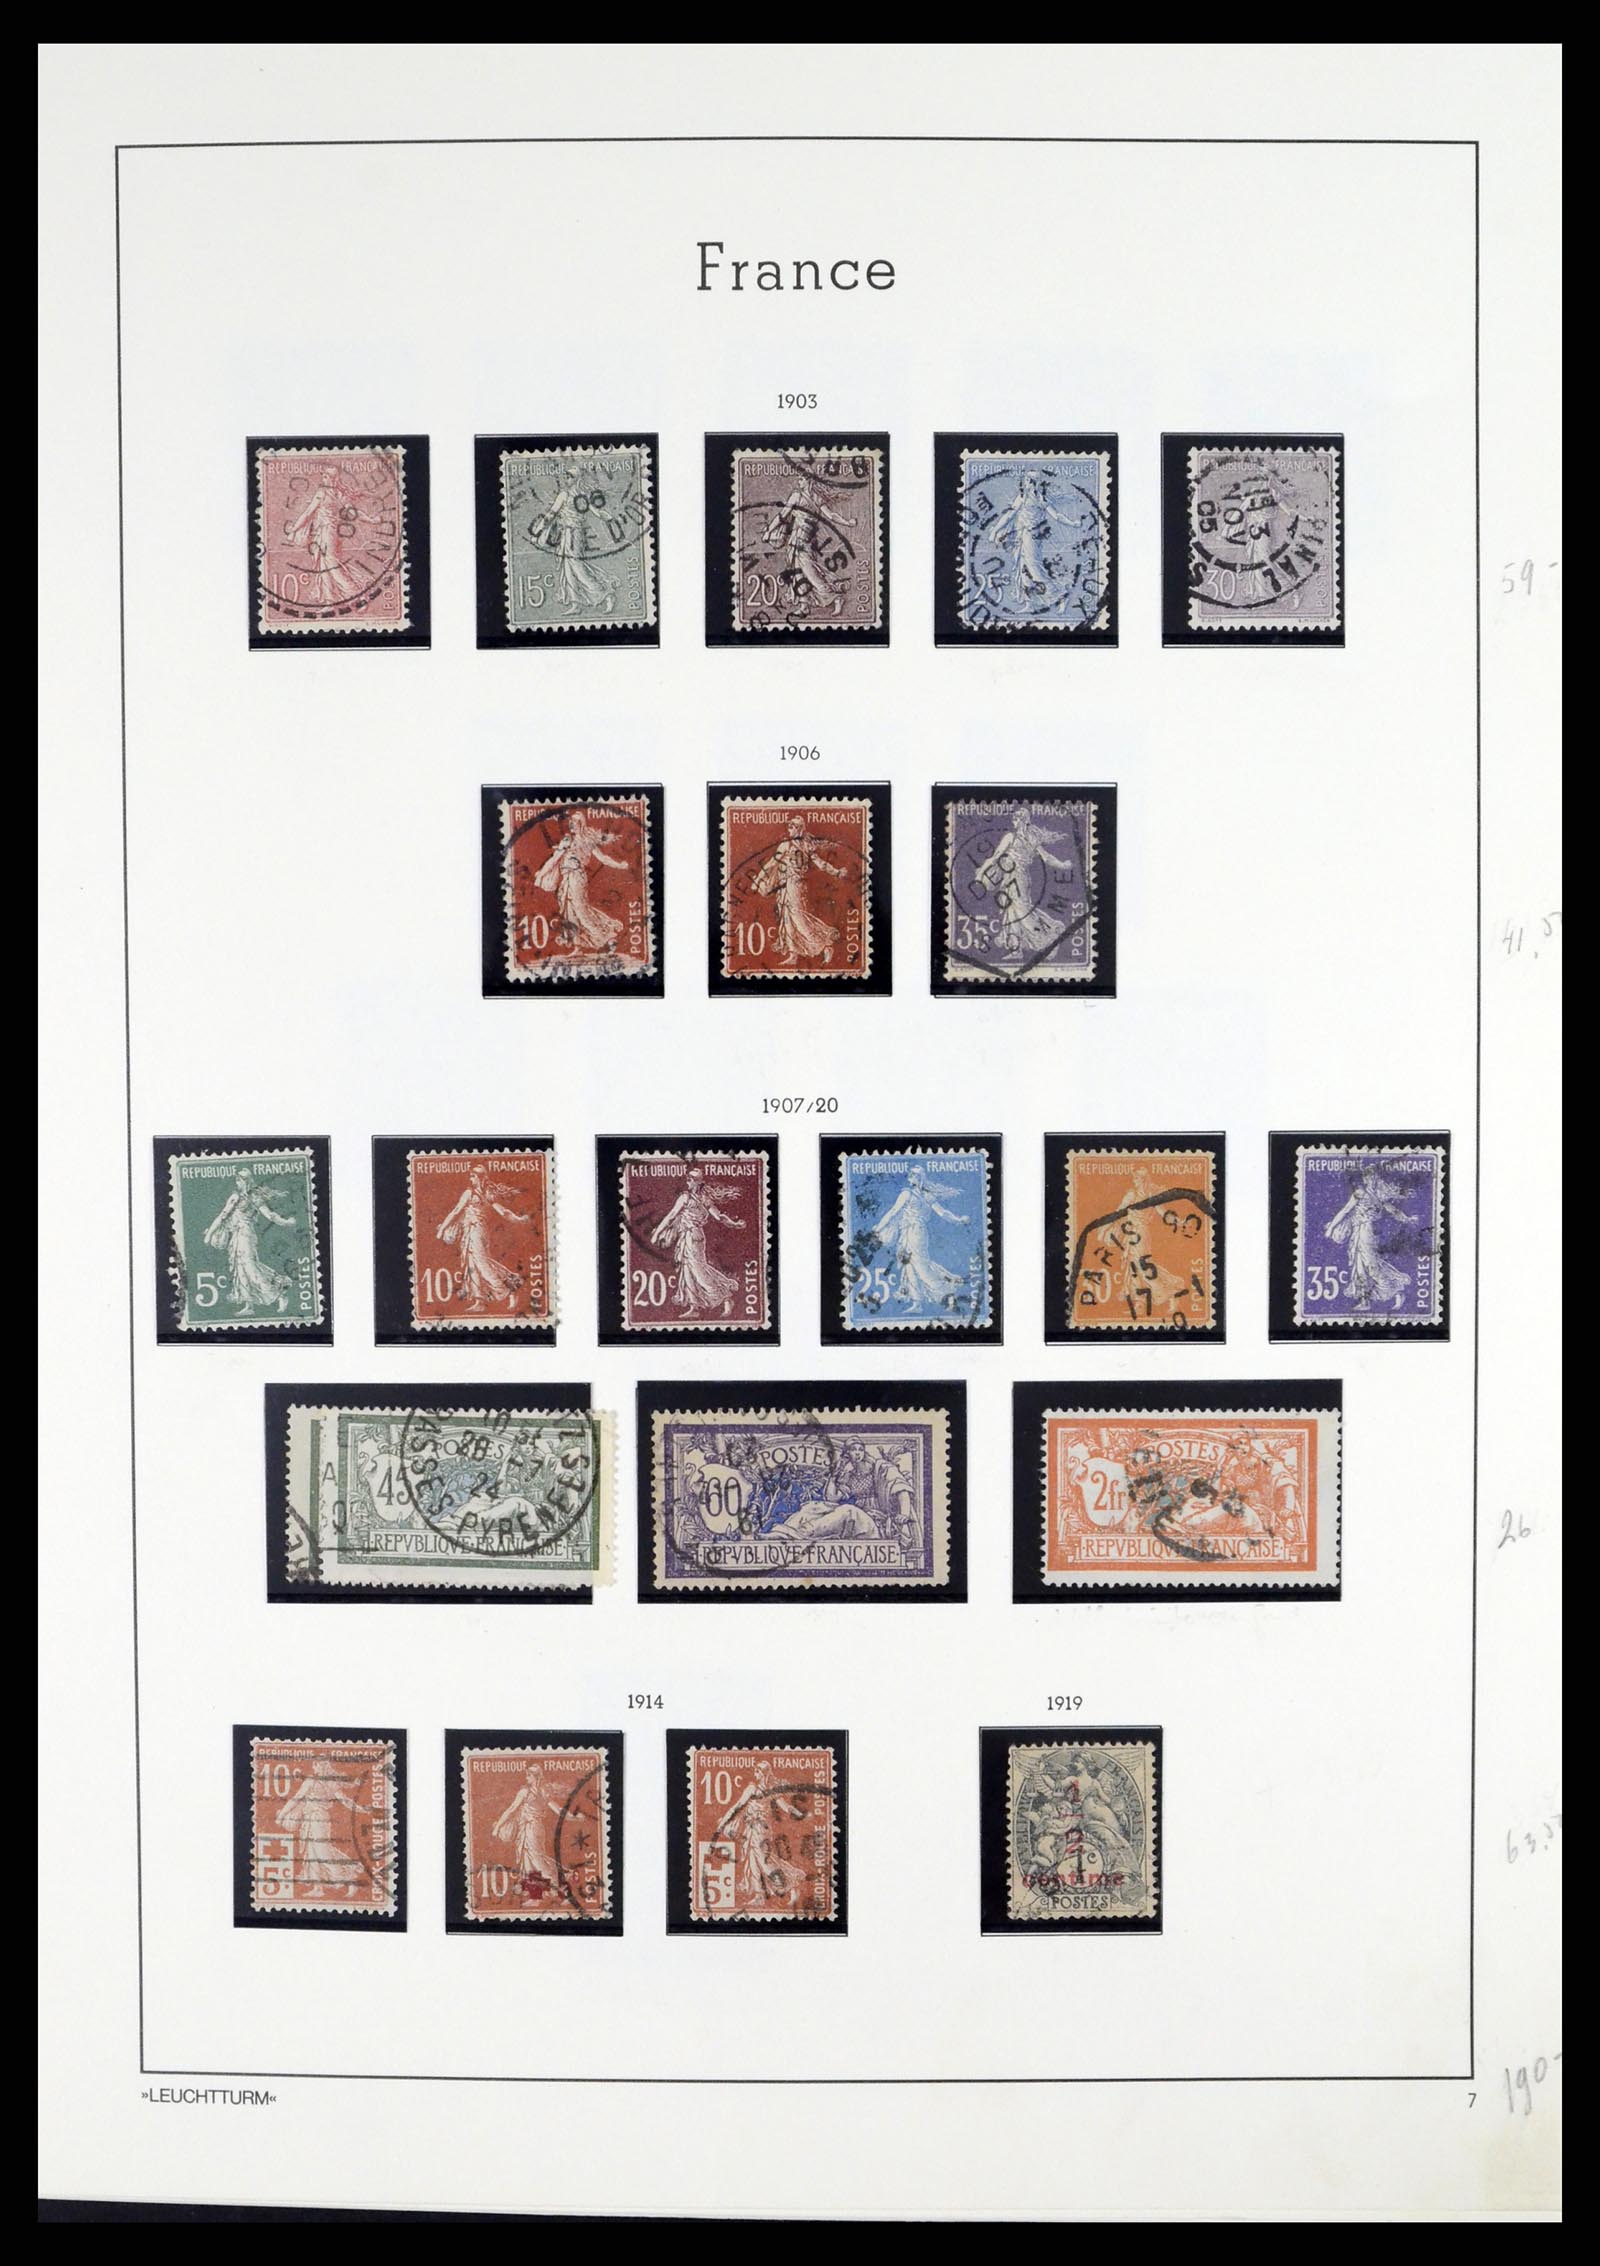 37415 009 - Stamp collection 37415 France 1849-2005.